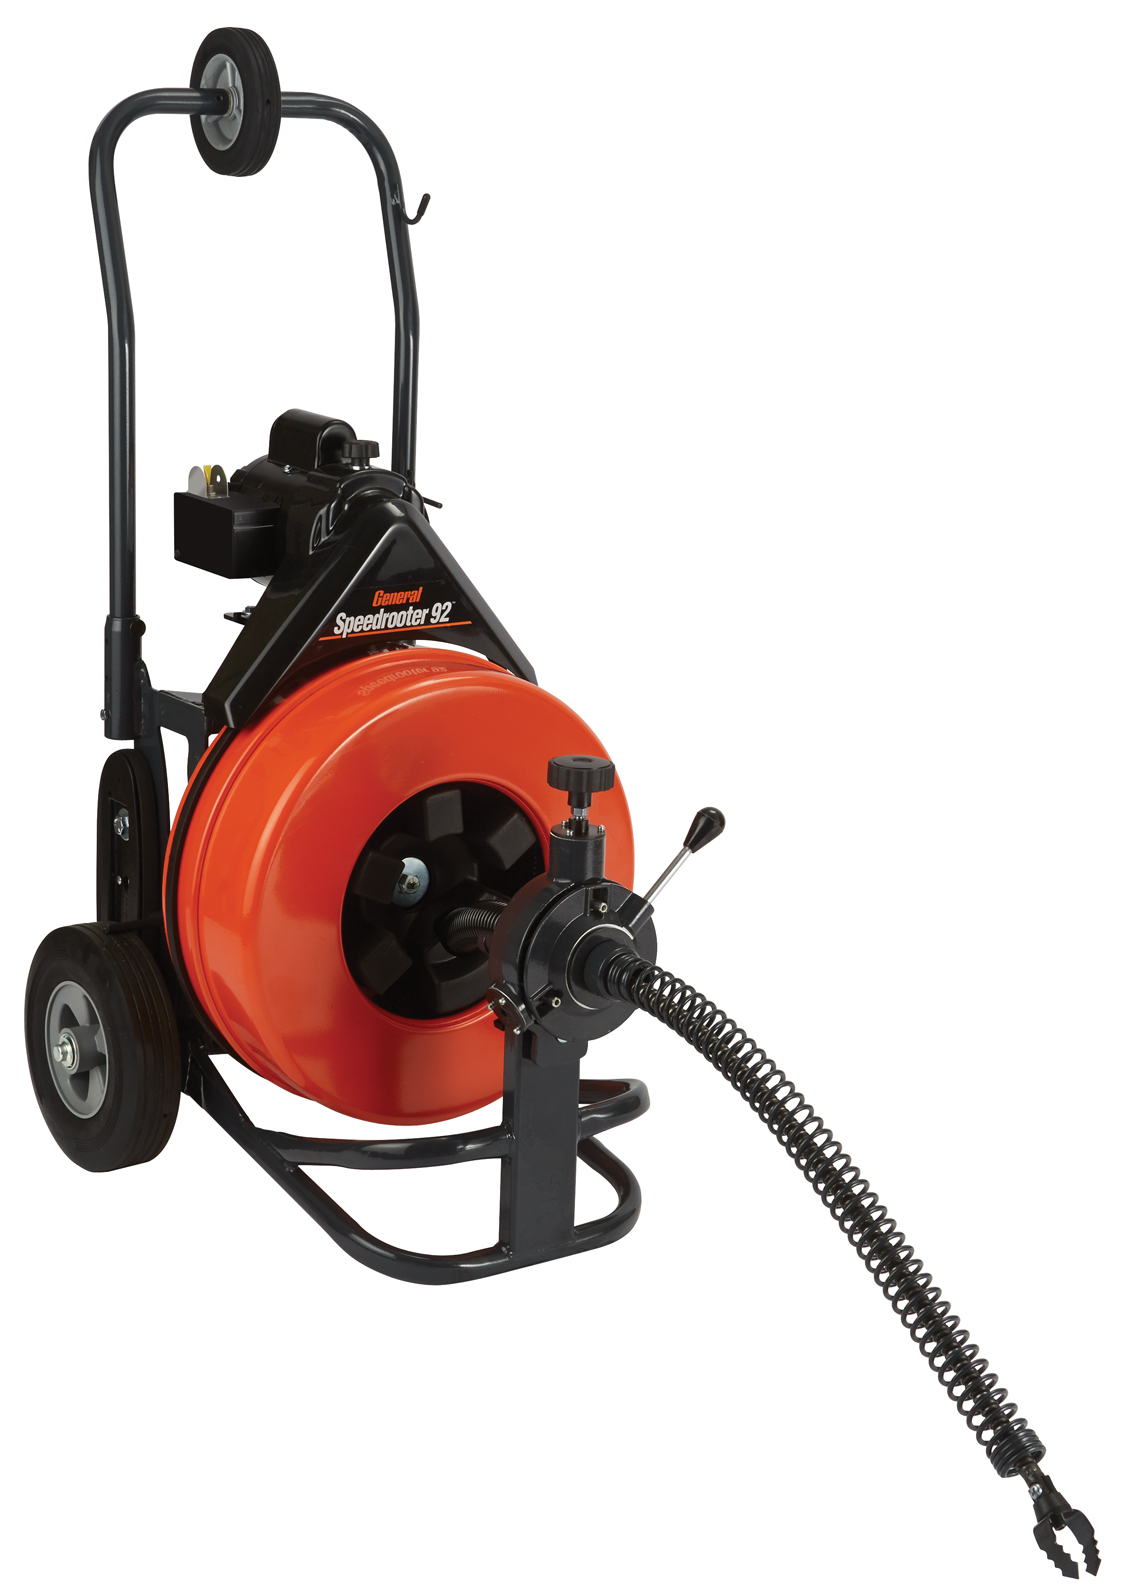 General Speedrooter P-S92-E Cable Drain Cleaner Machine for 3" to 6" Lines | 1/2 HP